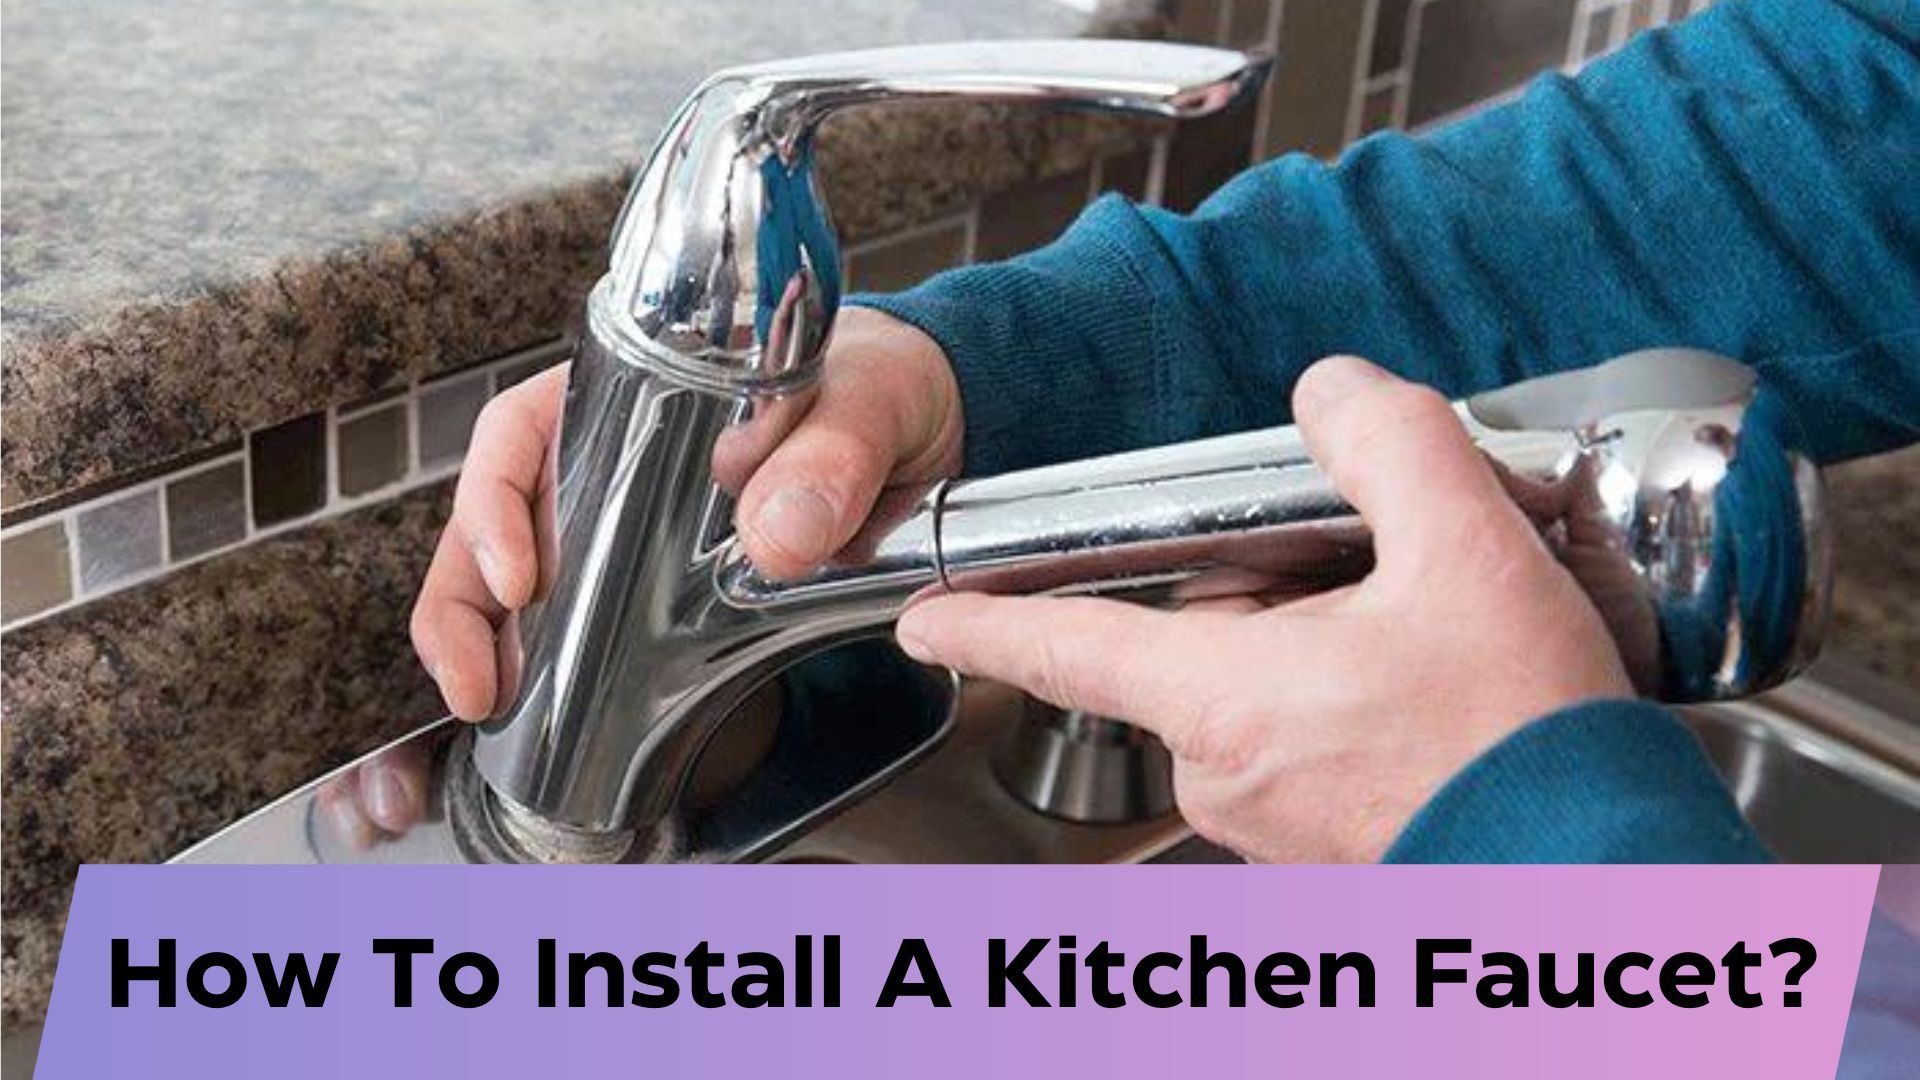 How To Install A Kitchen Faucet?